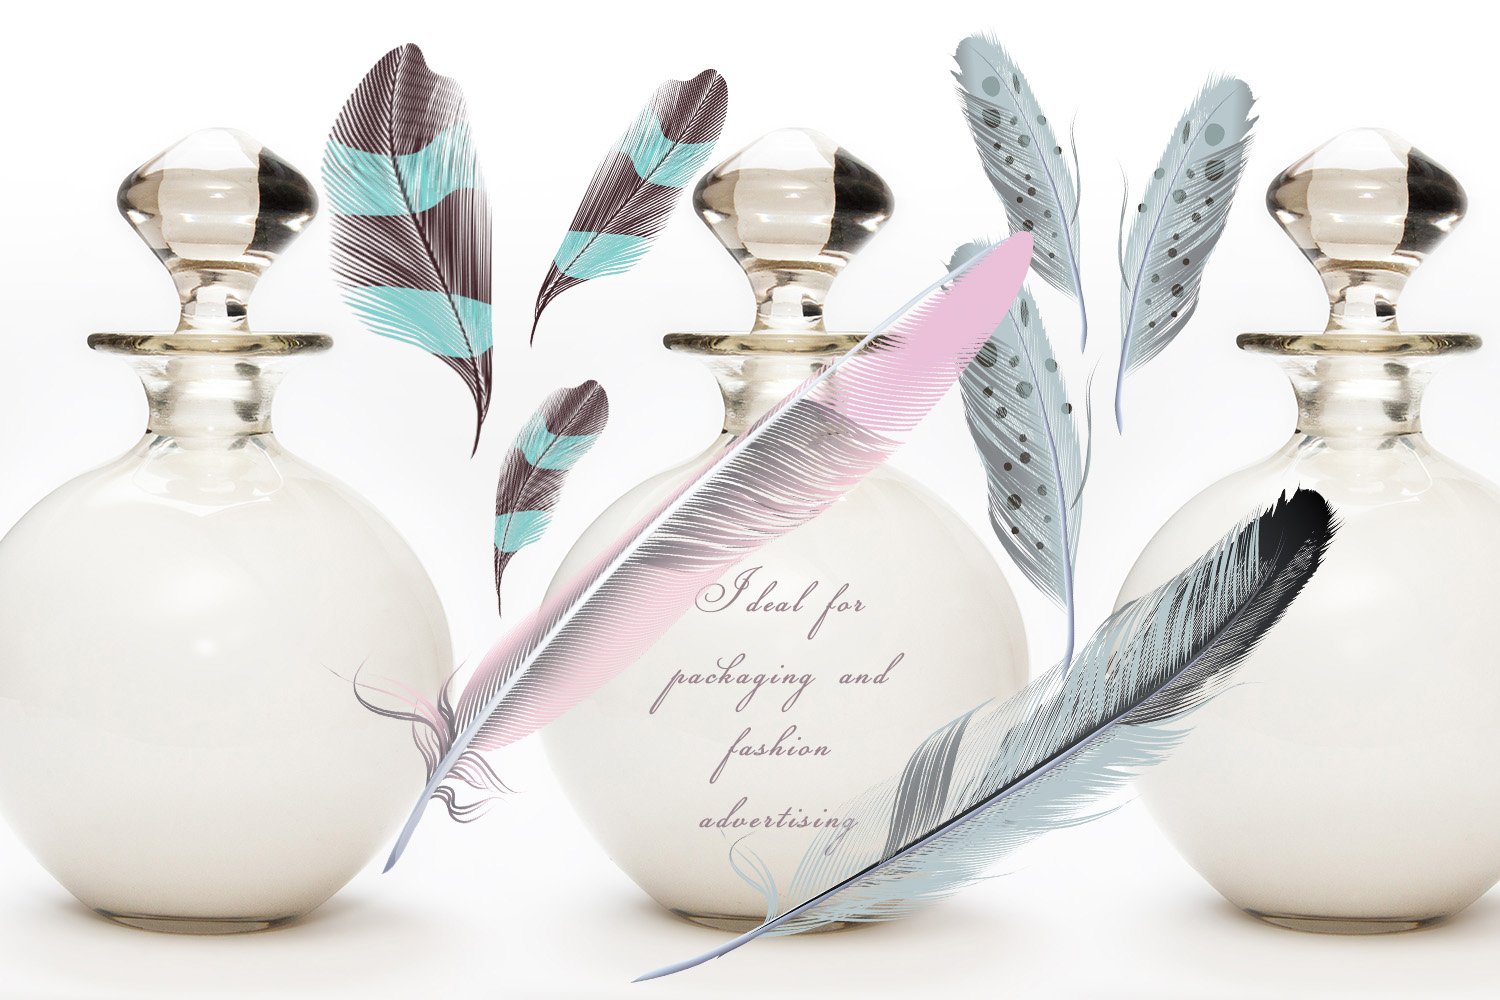 Delicate feathers for your composition.